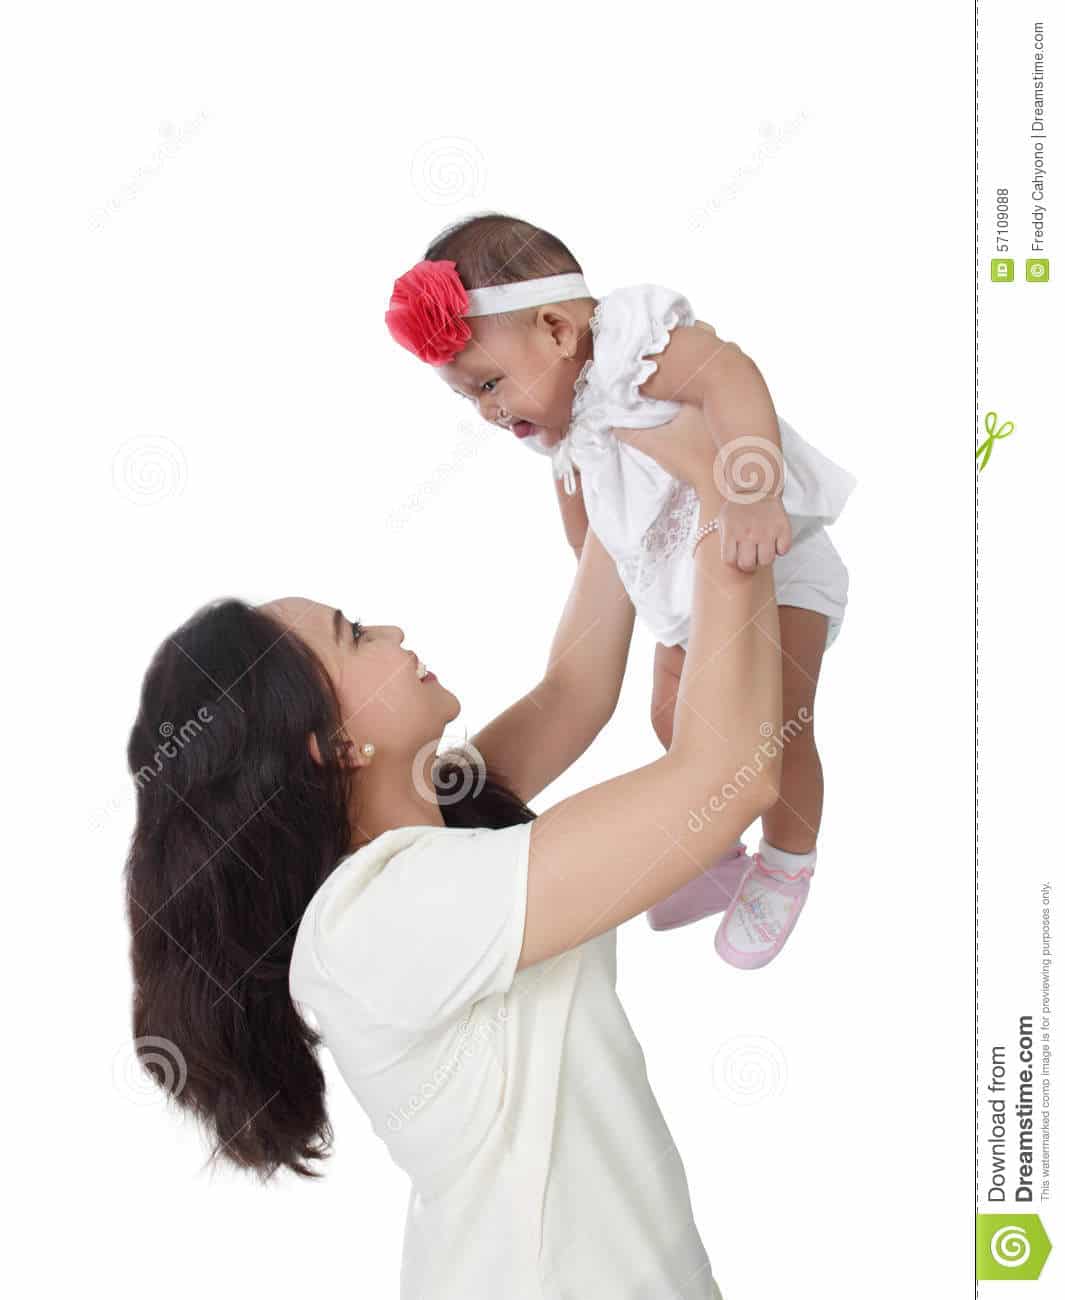 Mom lift baby up stock photo. Image of diaper, face, childhood